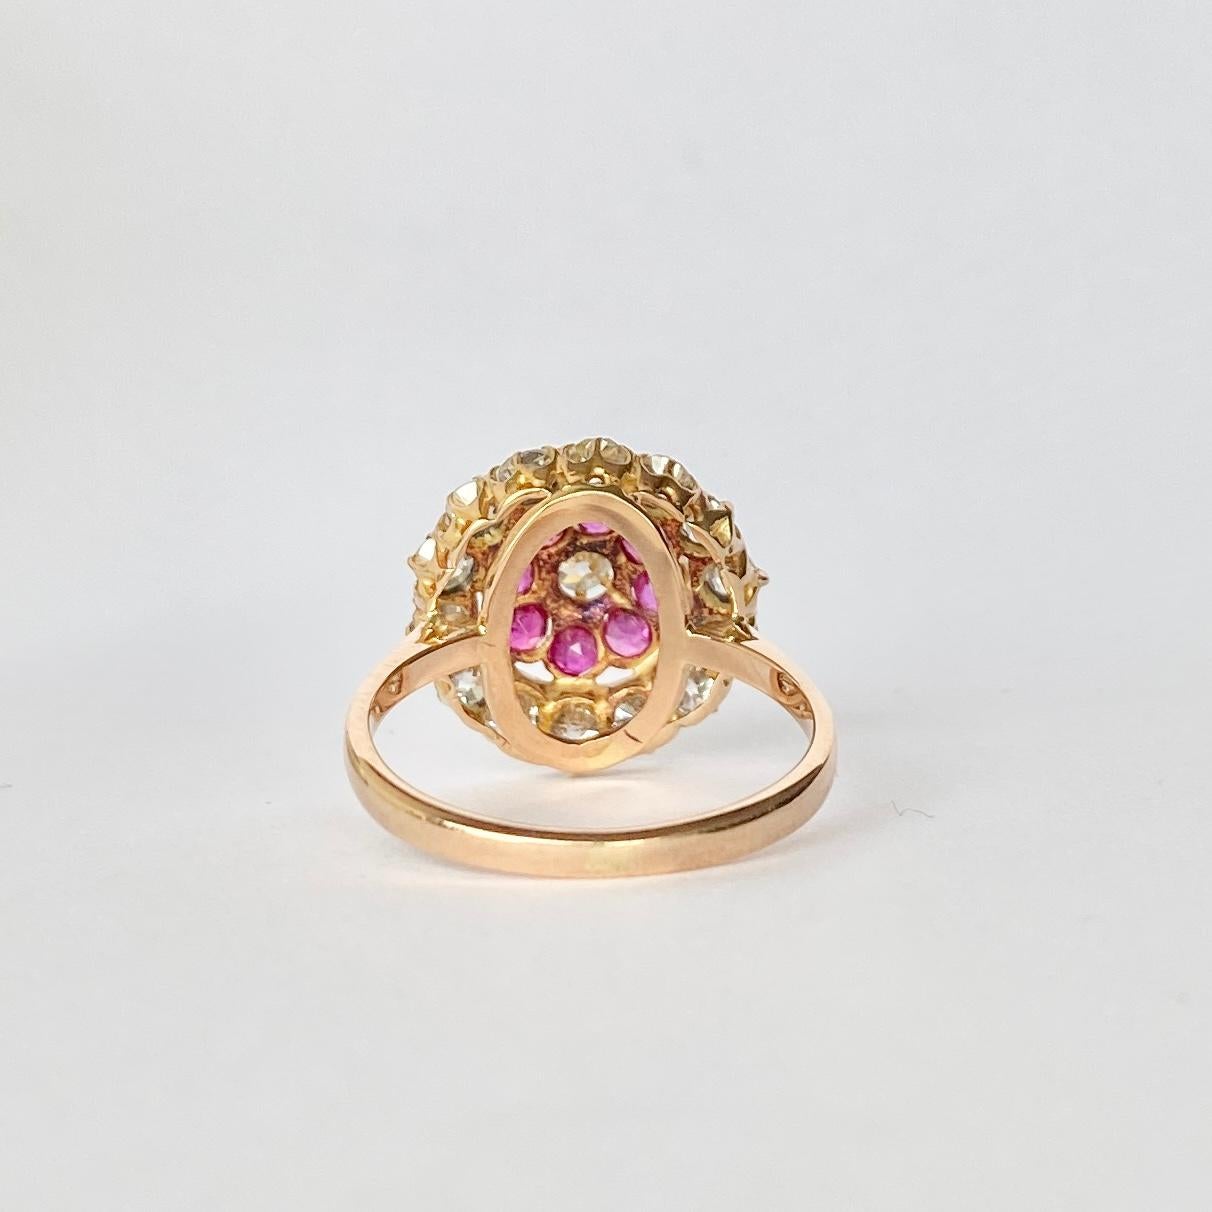 This stunner holds 8 rubies and 15 diamonds. The rubies are a bright, rich pink tone and the diamonds are so bright and sparkly. The diamonds total 1carat and the rubies total 40pts. The ring is modelled in 18carat gold. 

Ring Size: M 1/2 or 6